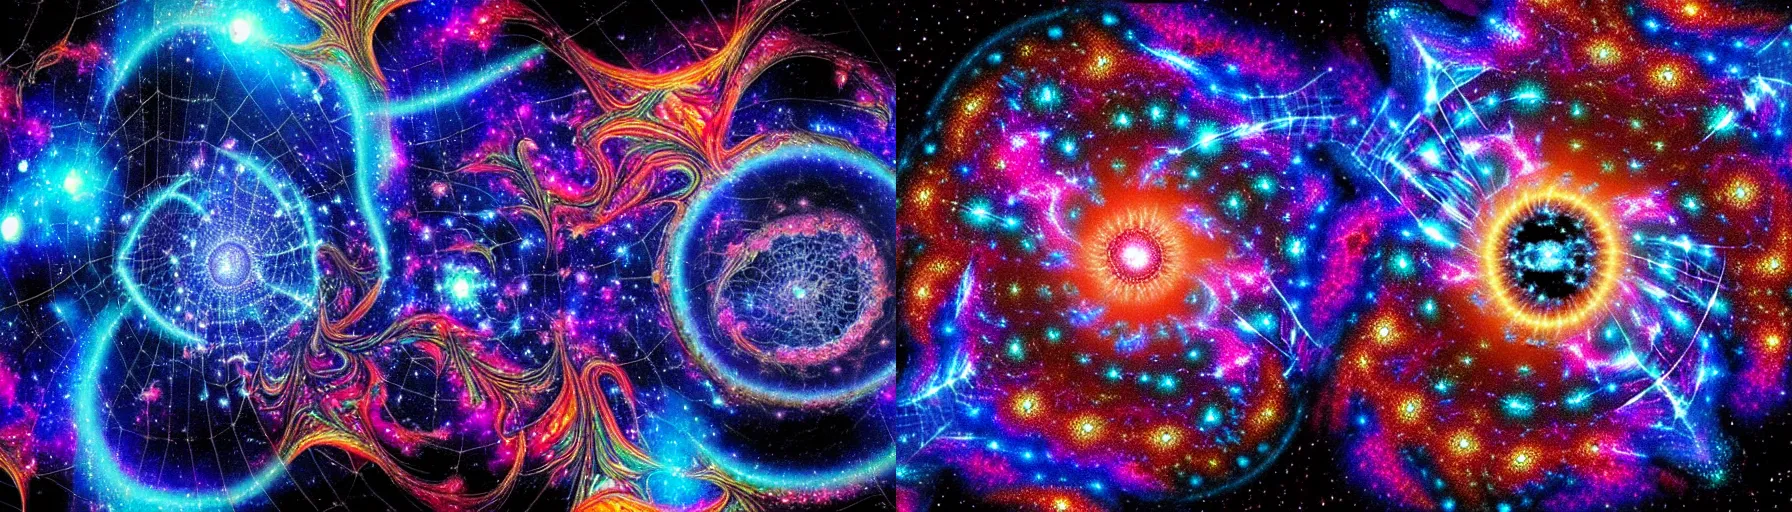 Prompt: a galaxy exploding, psychedelic colors, a blacksmith swinging his hammer at his forge, realistic reflections, body building blacksmith, stars, psychedelic patterns, fractal, rippling fabric of reality, the spider that weaves the web of time, sharpen lines